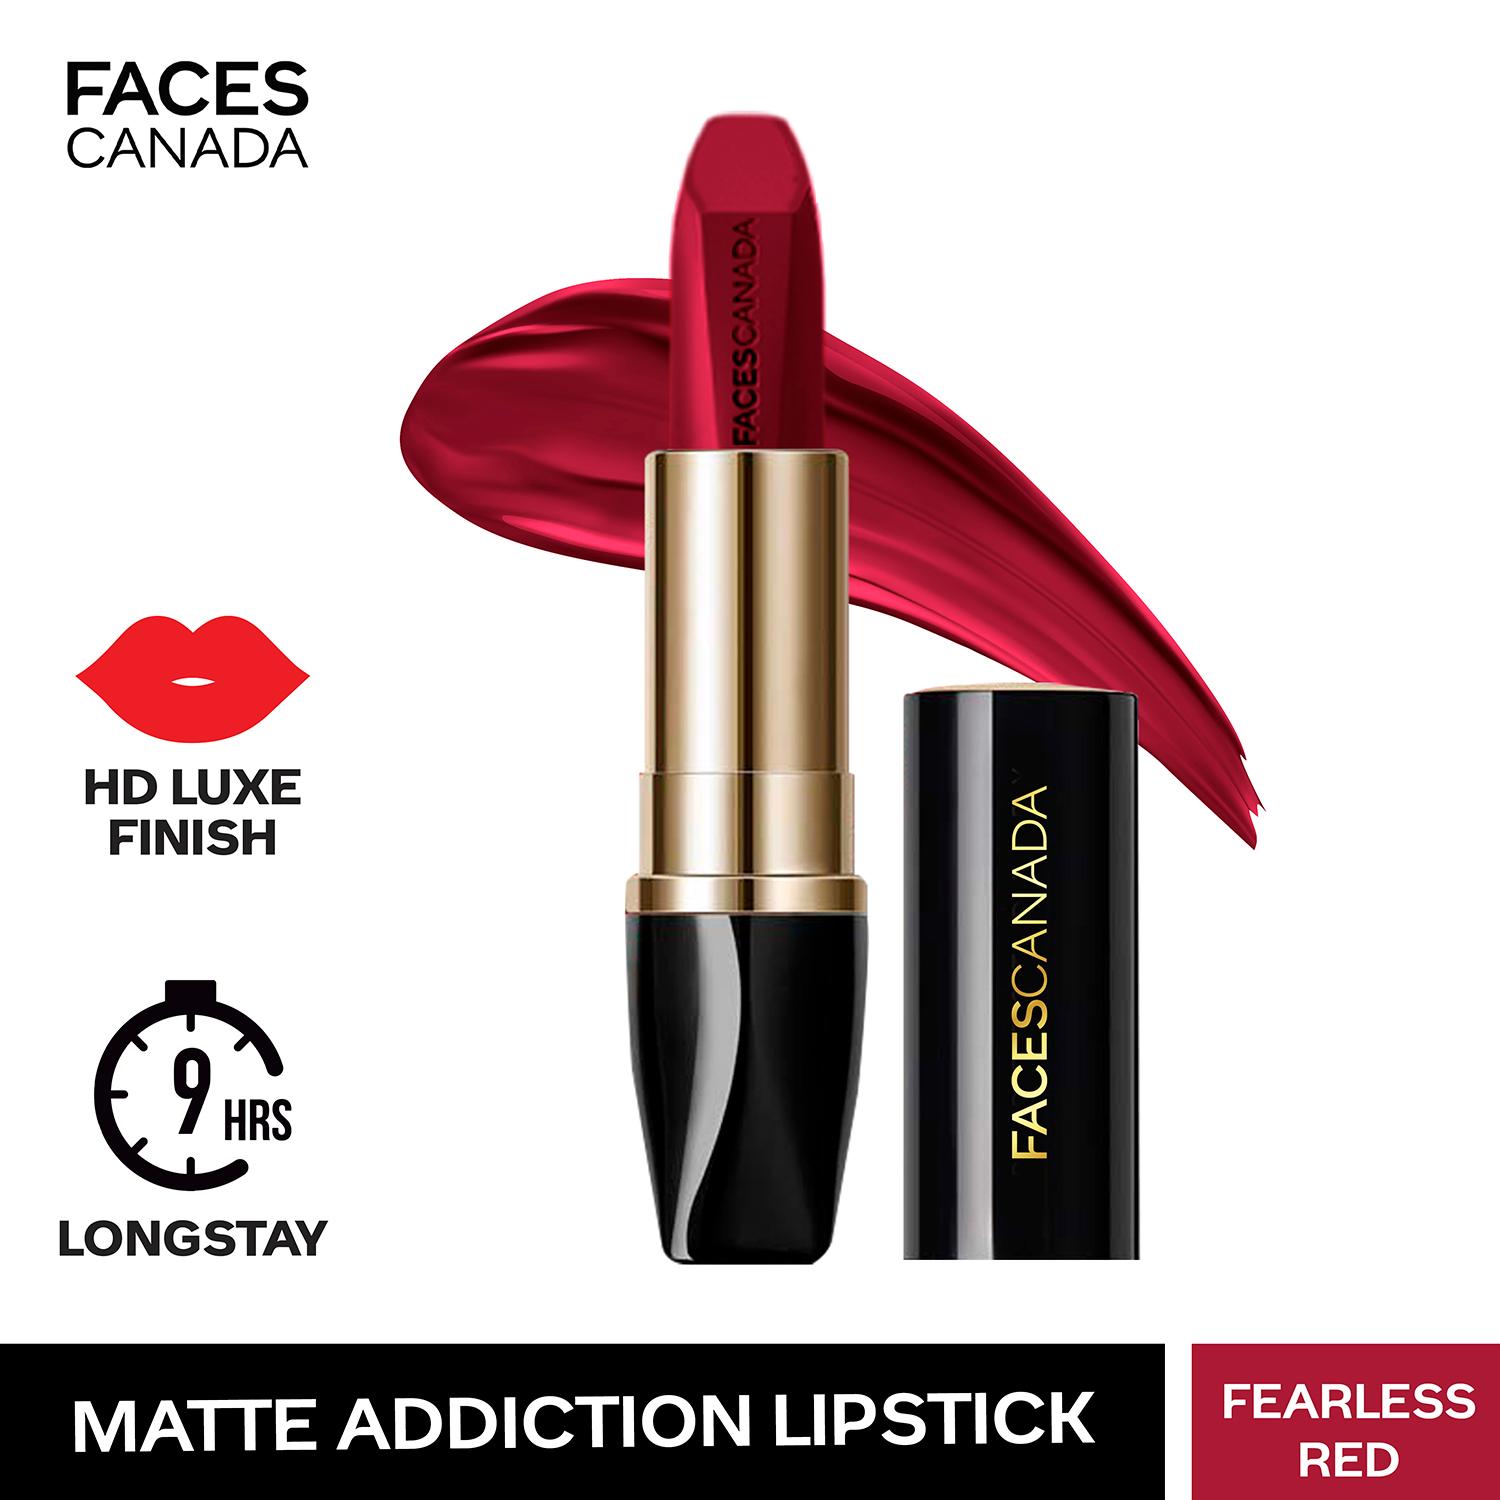 Faces Canada | Faces Canada Matte Addiction Lipstick, 9HR Stay, HD Finish, Intense Color - Fearless Red (3.7 g)